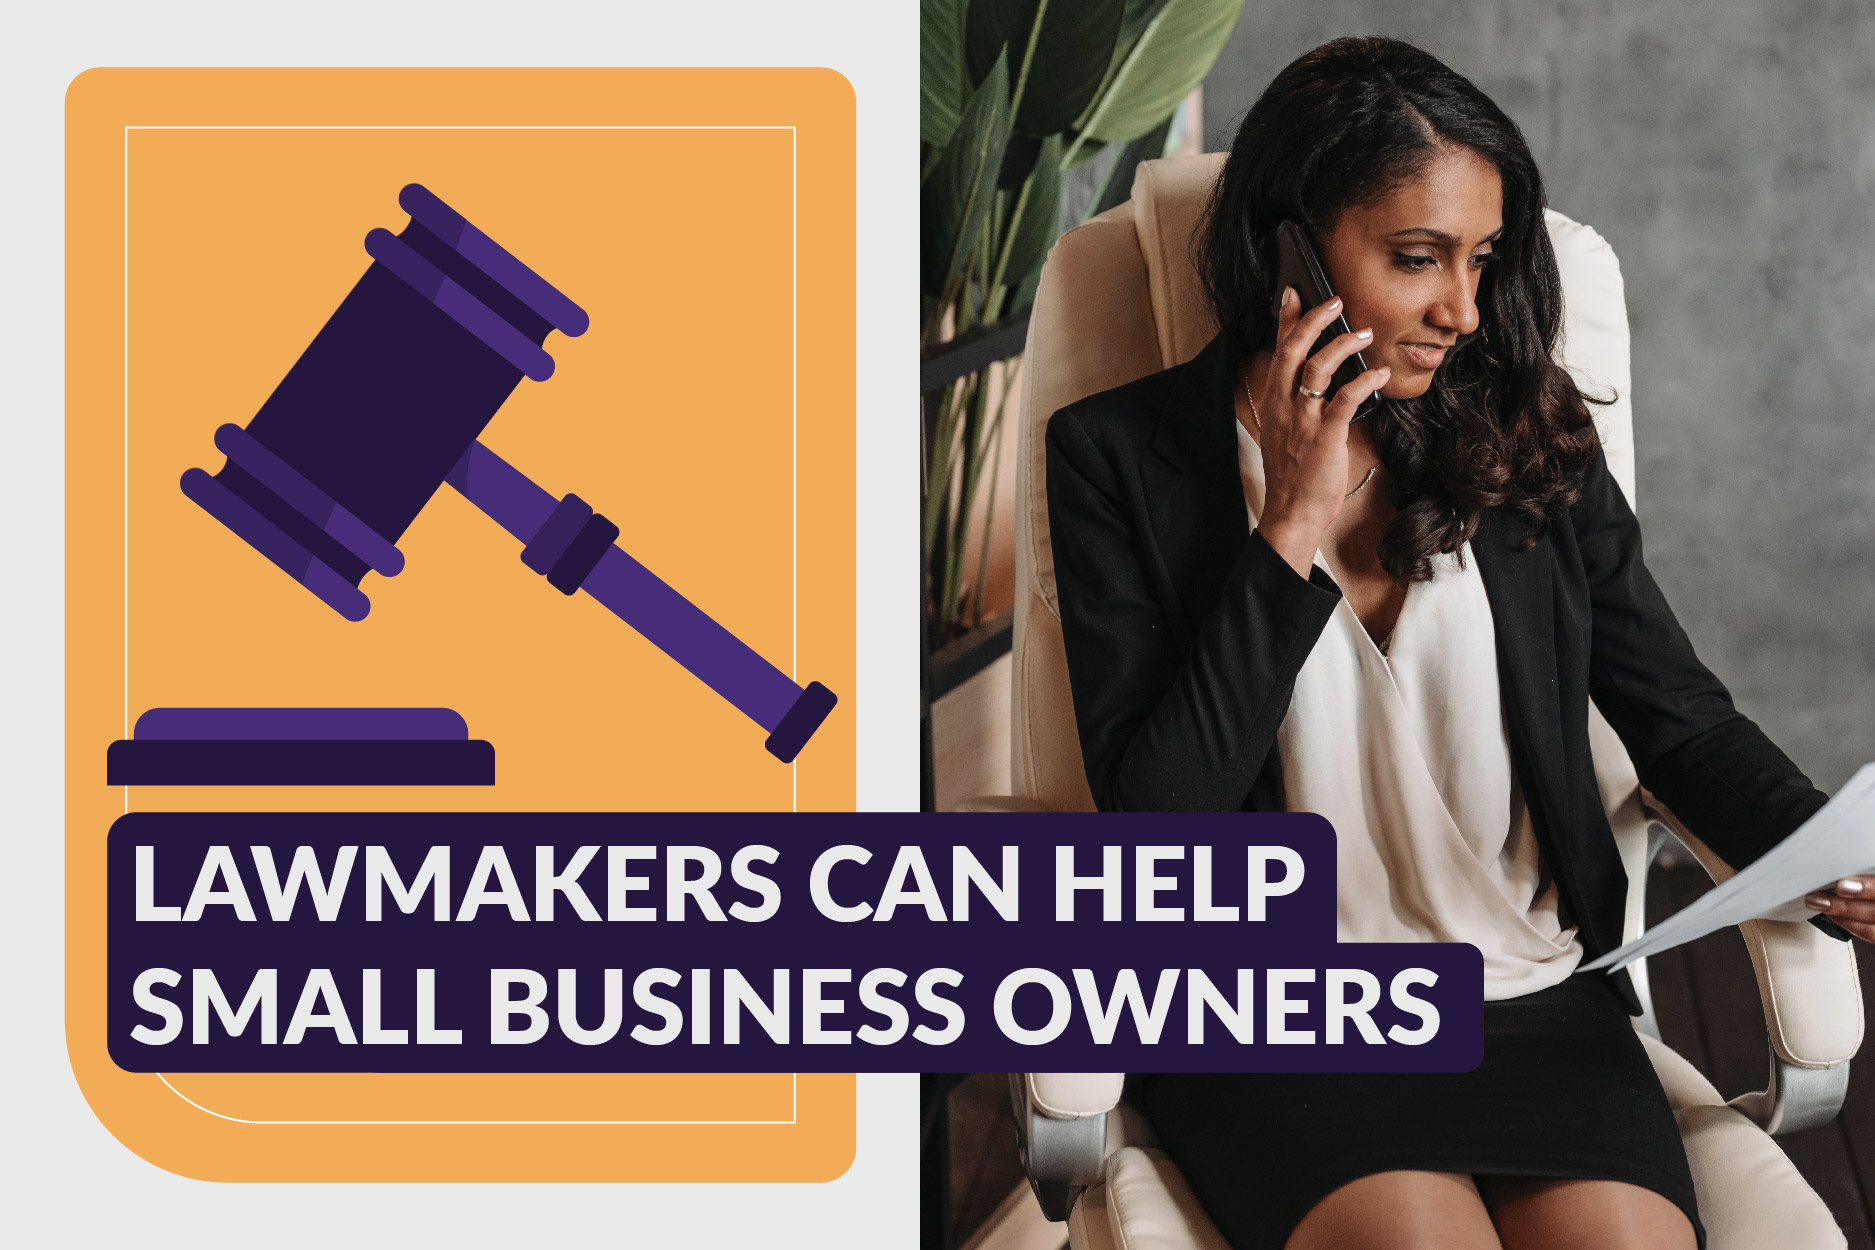 Business professional, woman of color on the phone while reviewing documents. An illustration of a gavel and text "lawmakers can help small business owners"